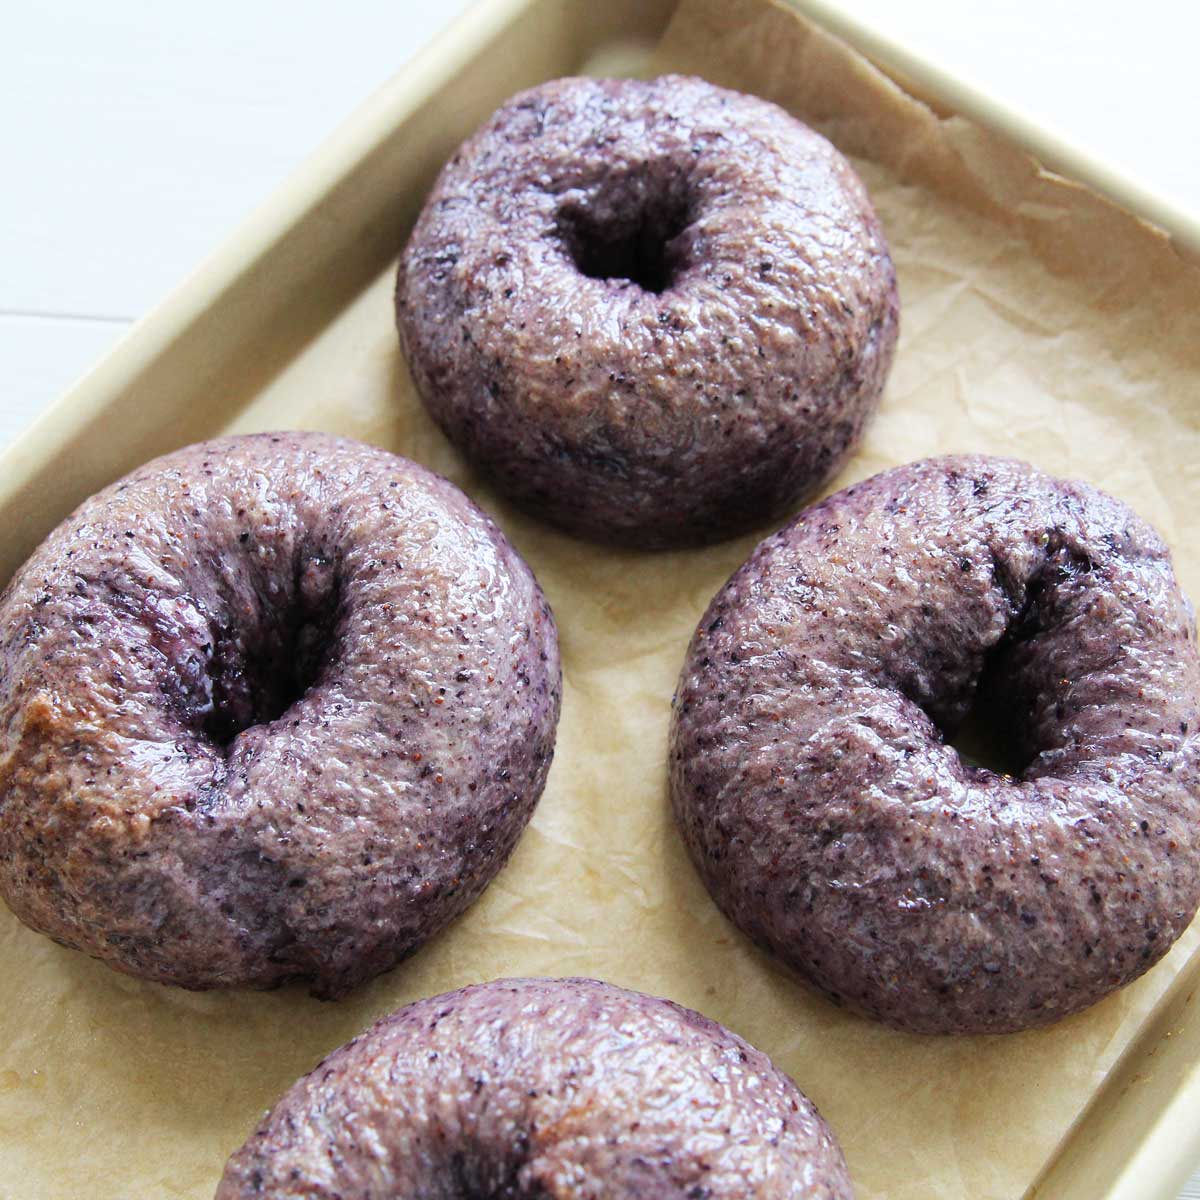 Chocolate Chip Blueberry Bagels (Easy, Cream Cheese Stuffed Bagel Recipe) - bagels